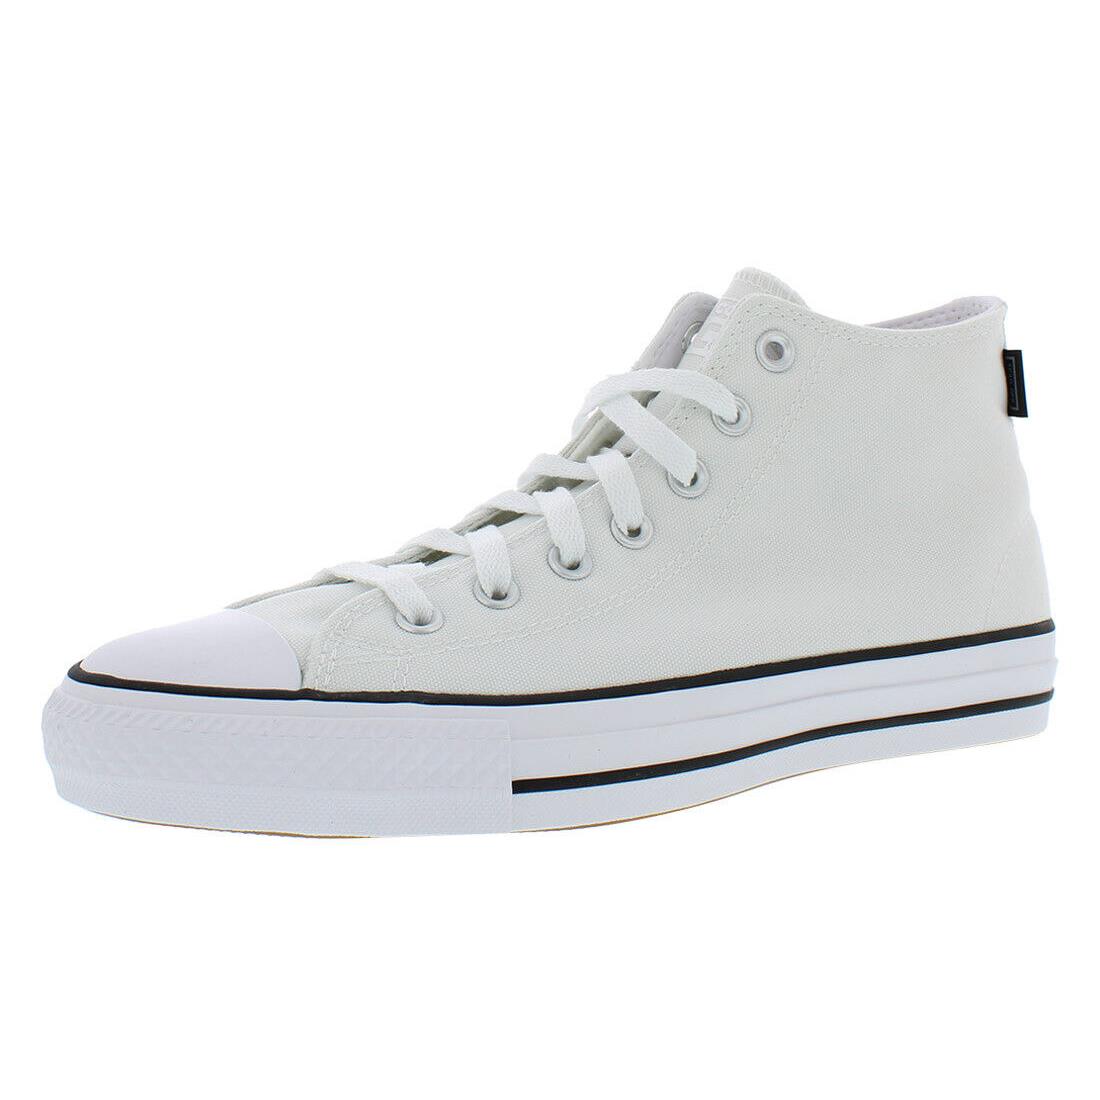 Converse Chuck Taylor All Star Pro Mid Unisex Shoes